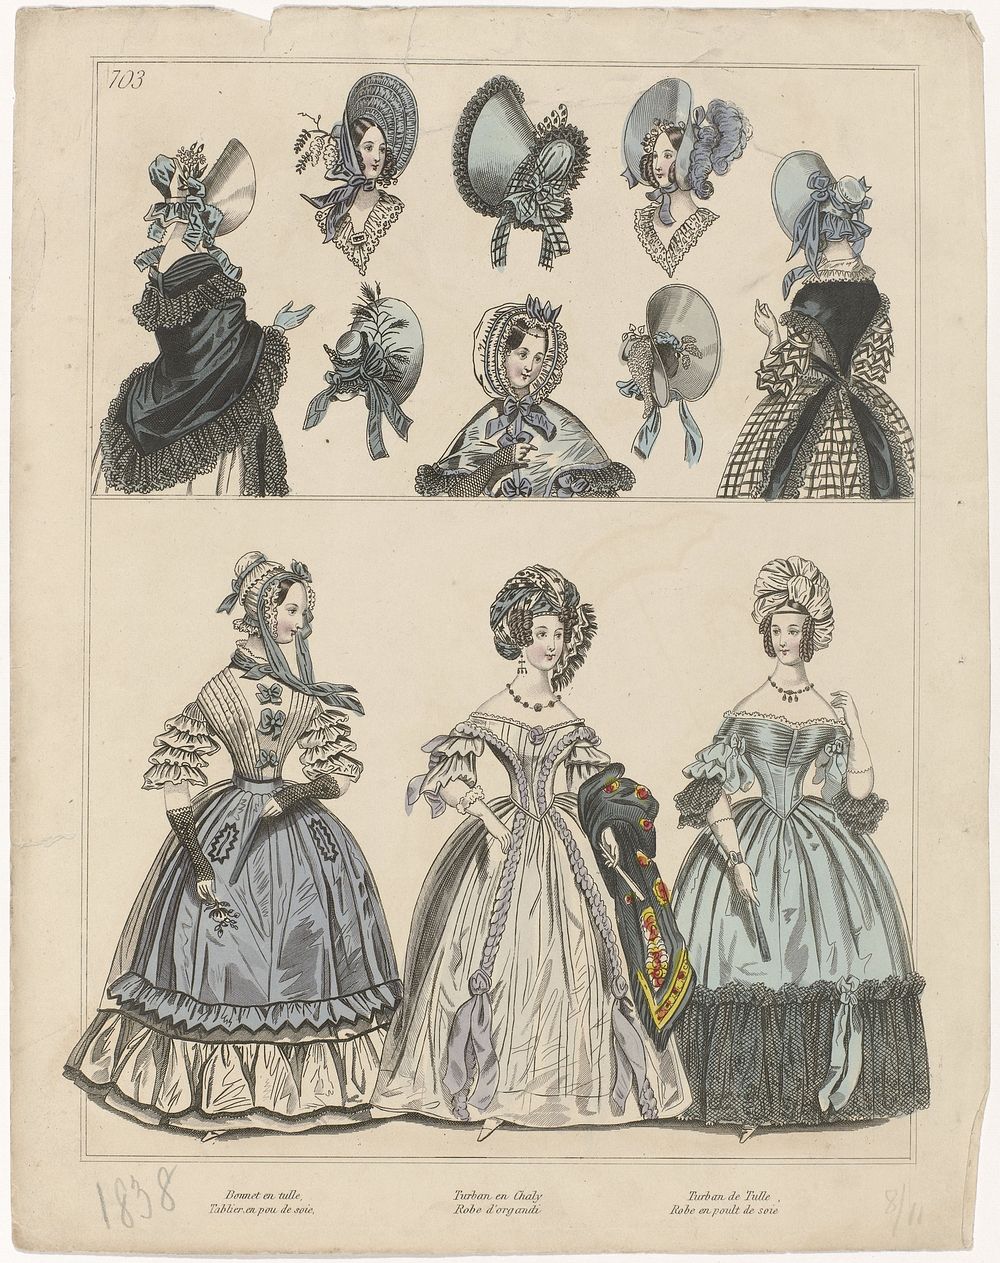 Townsend's Monthly Selection of Parisian Costumes, 1838, No. 703 : Bonnet en tull (...) (1838) by anonymous and Henry James…